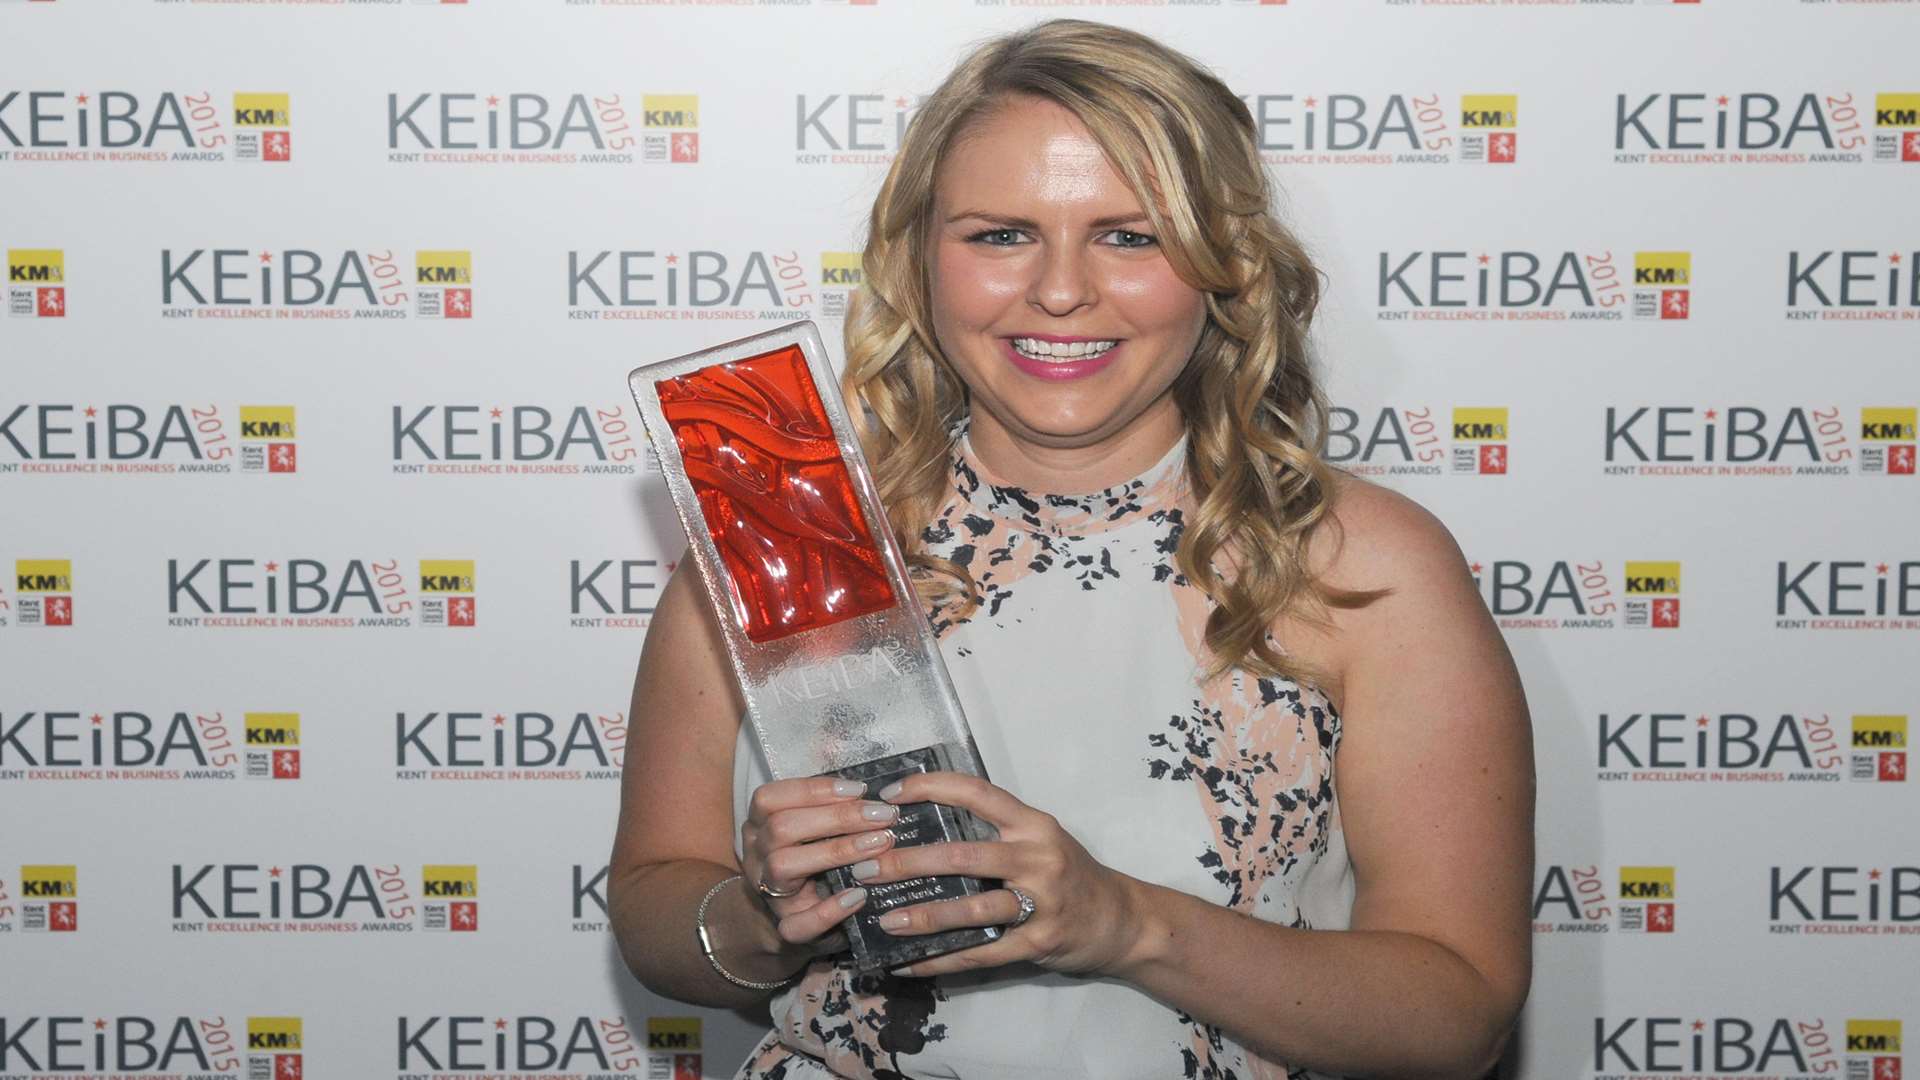 Becky Campbell from Reflect Digital won KEiBA Young Entrepreneur of the Year